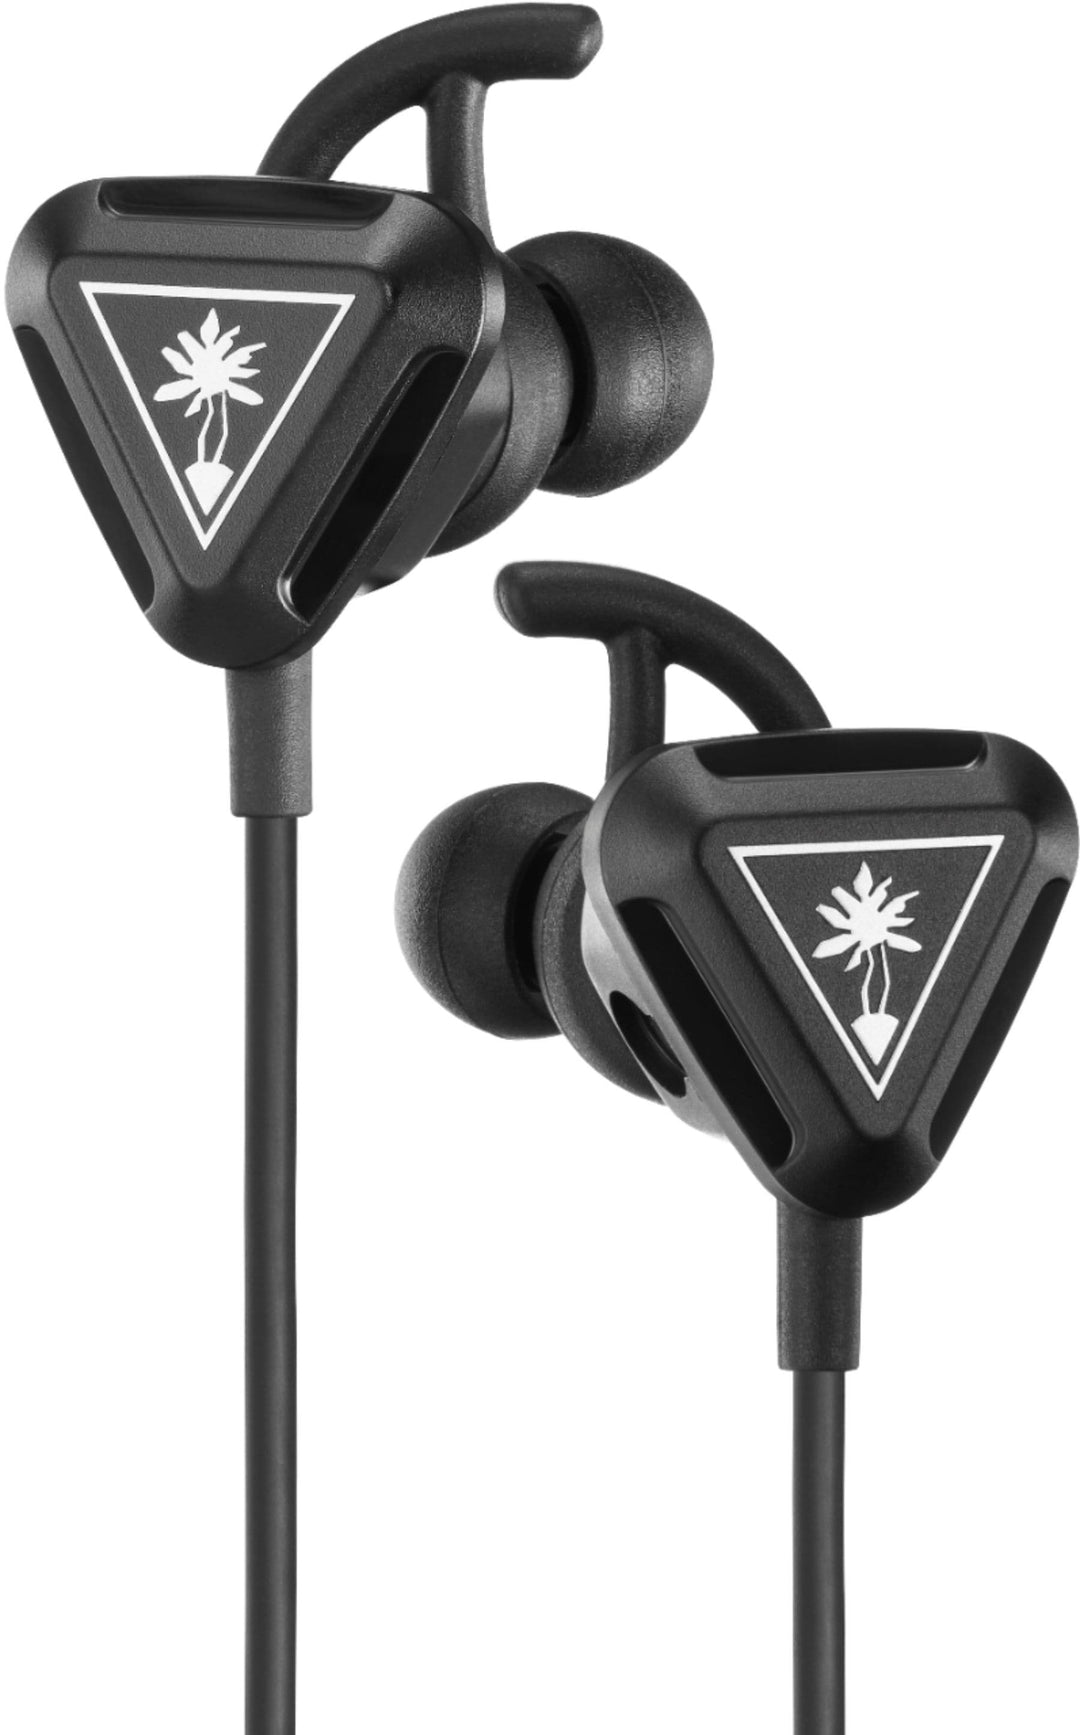 Turtle Beach - Battle Buds In-Ear Gaming Headset for Mobile Gaming, Nintendo Switch, Xbox One, Xbox Series X|S, PS4 & PS5 - Black/Silver_7